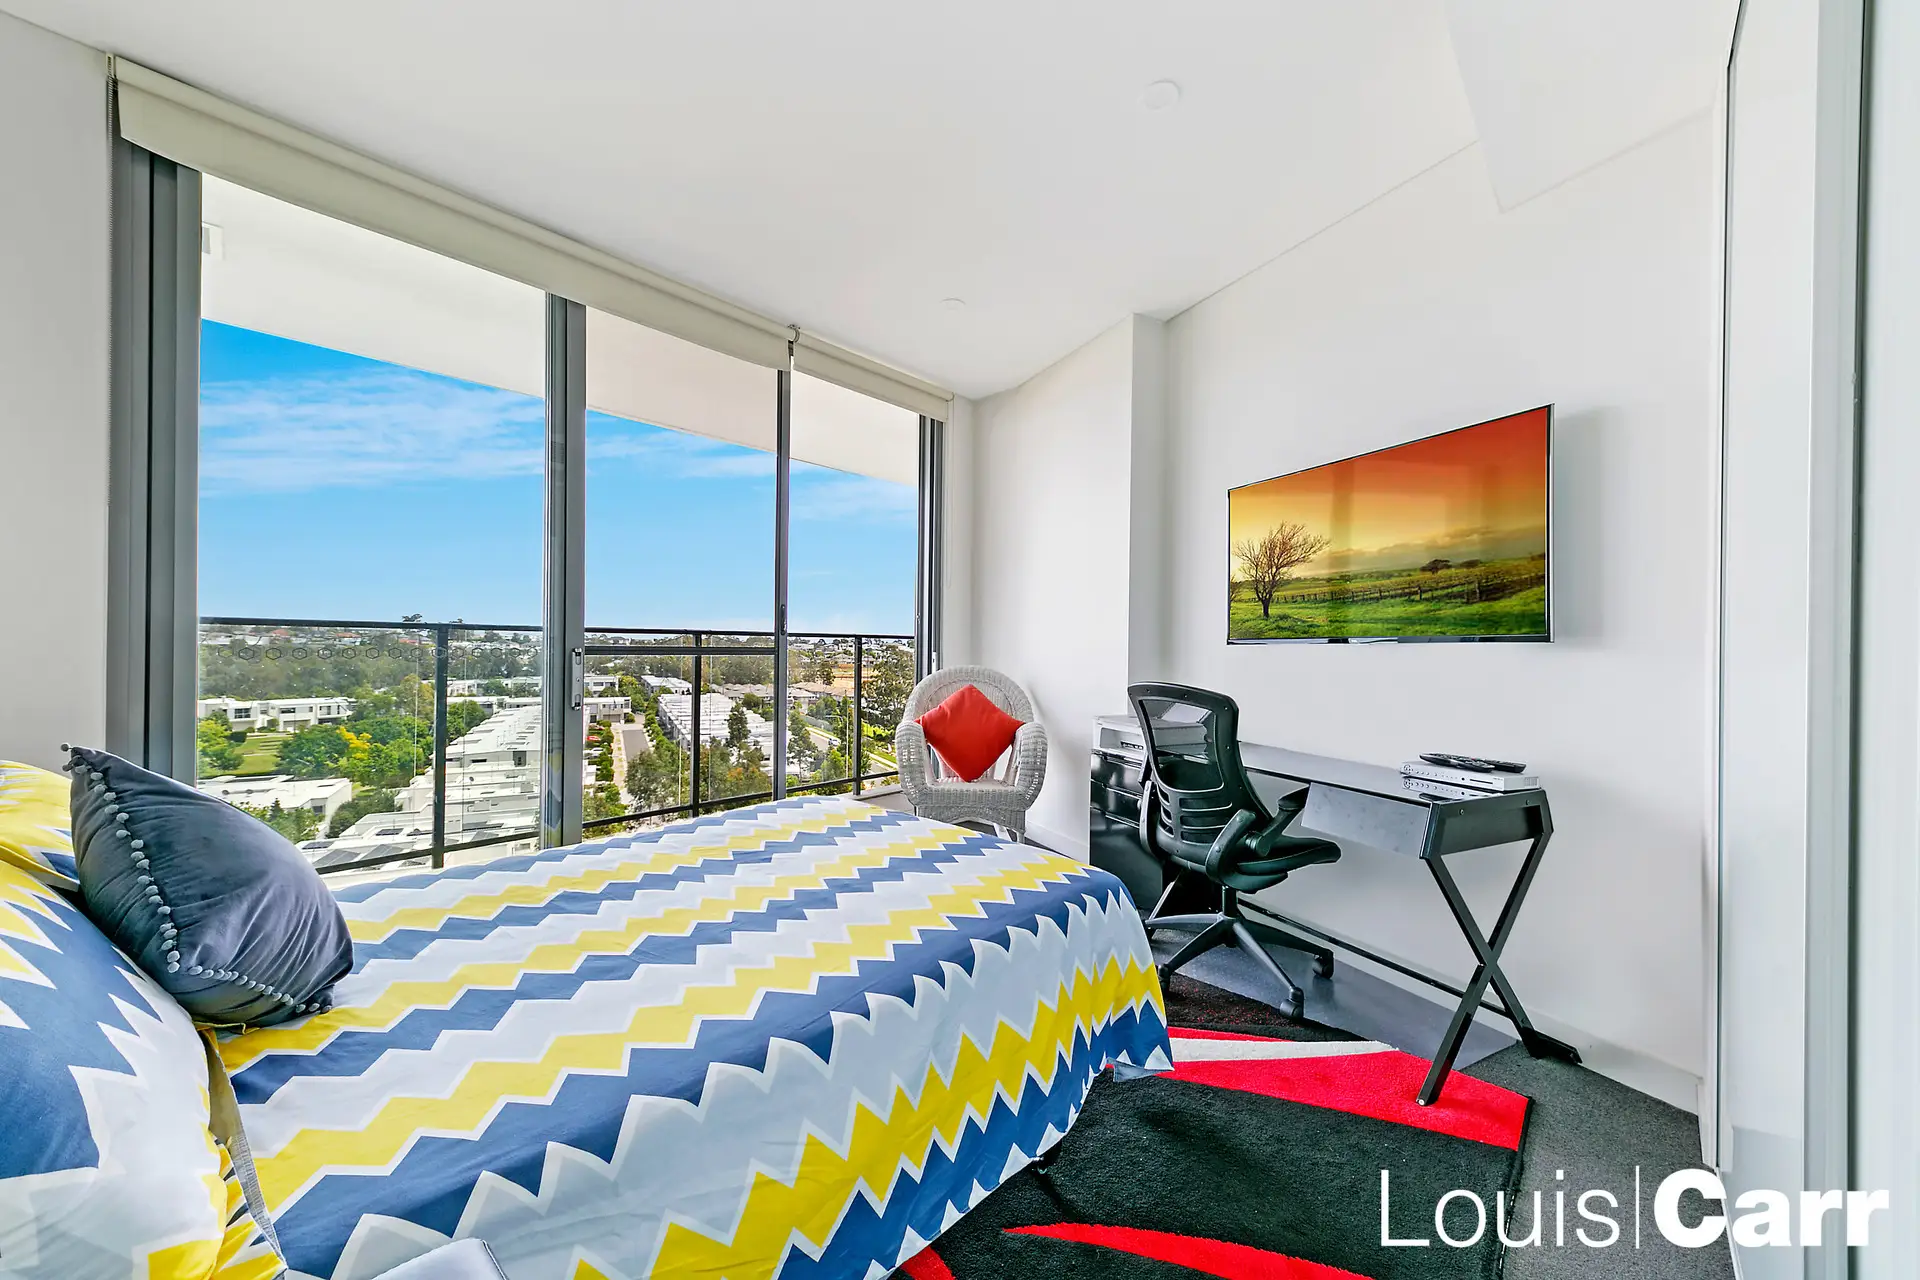 Photo #8: 74/38 Solent Circuit, Norwest - Sold by Louis Carr Real Estate